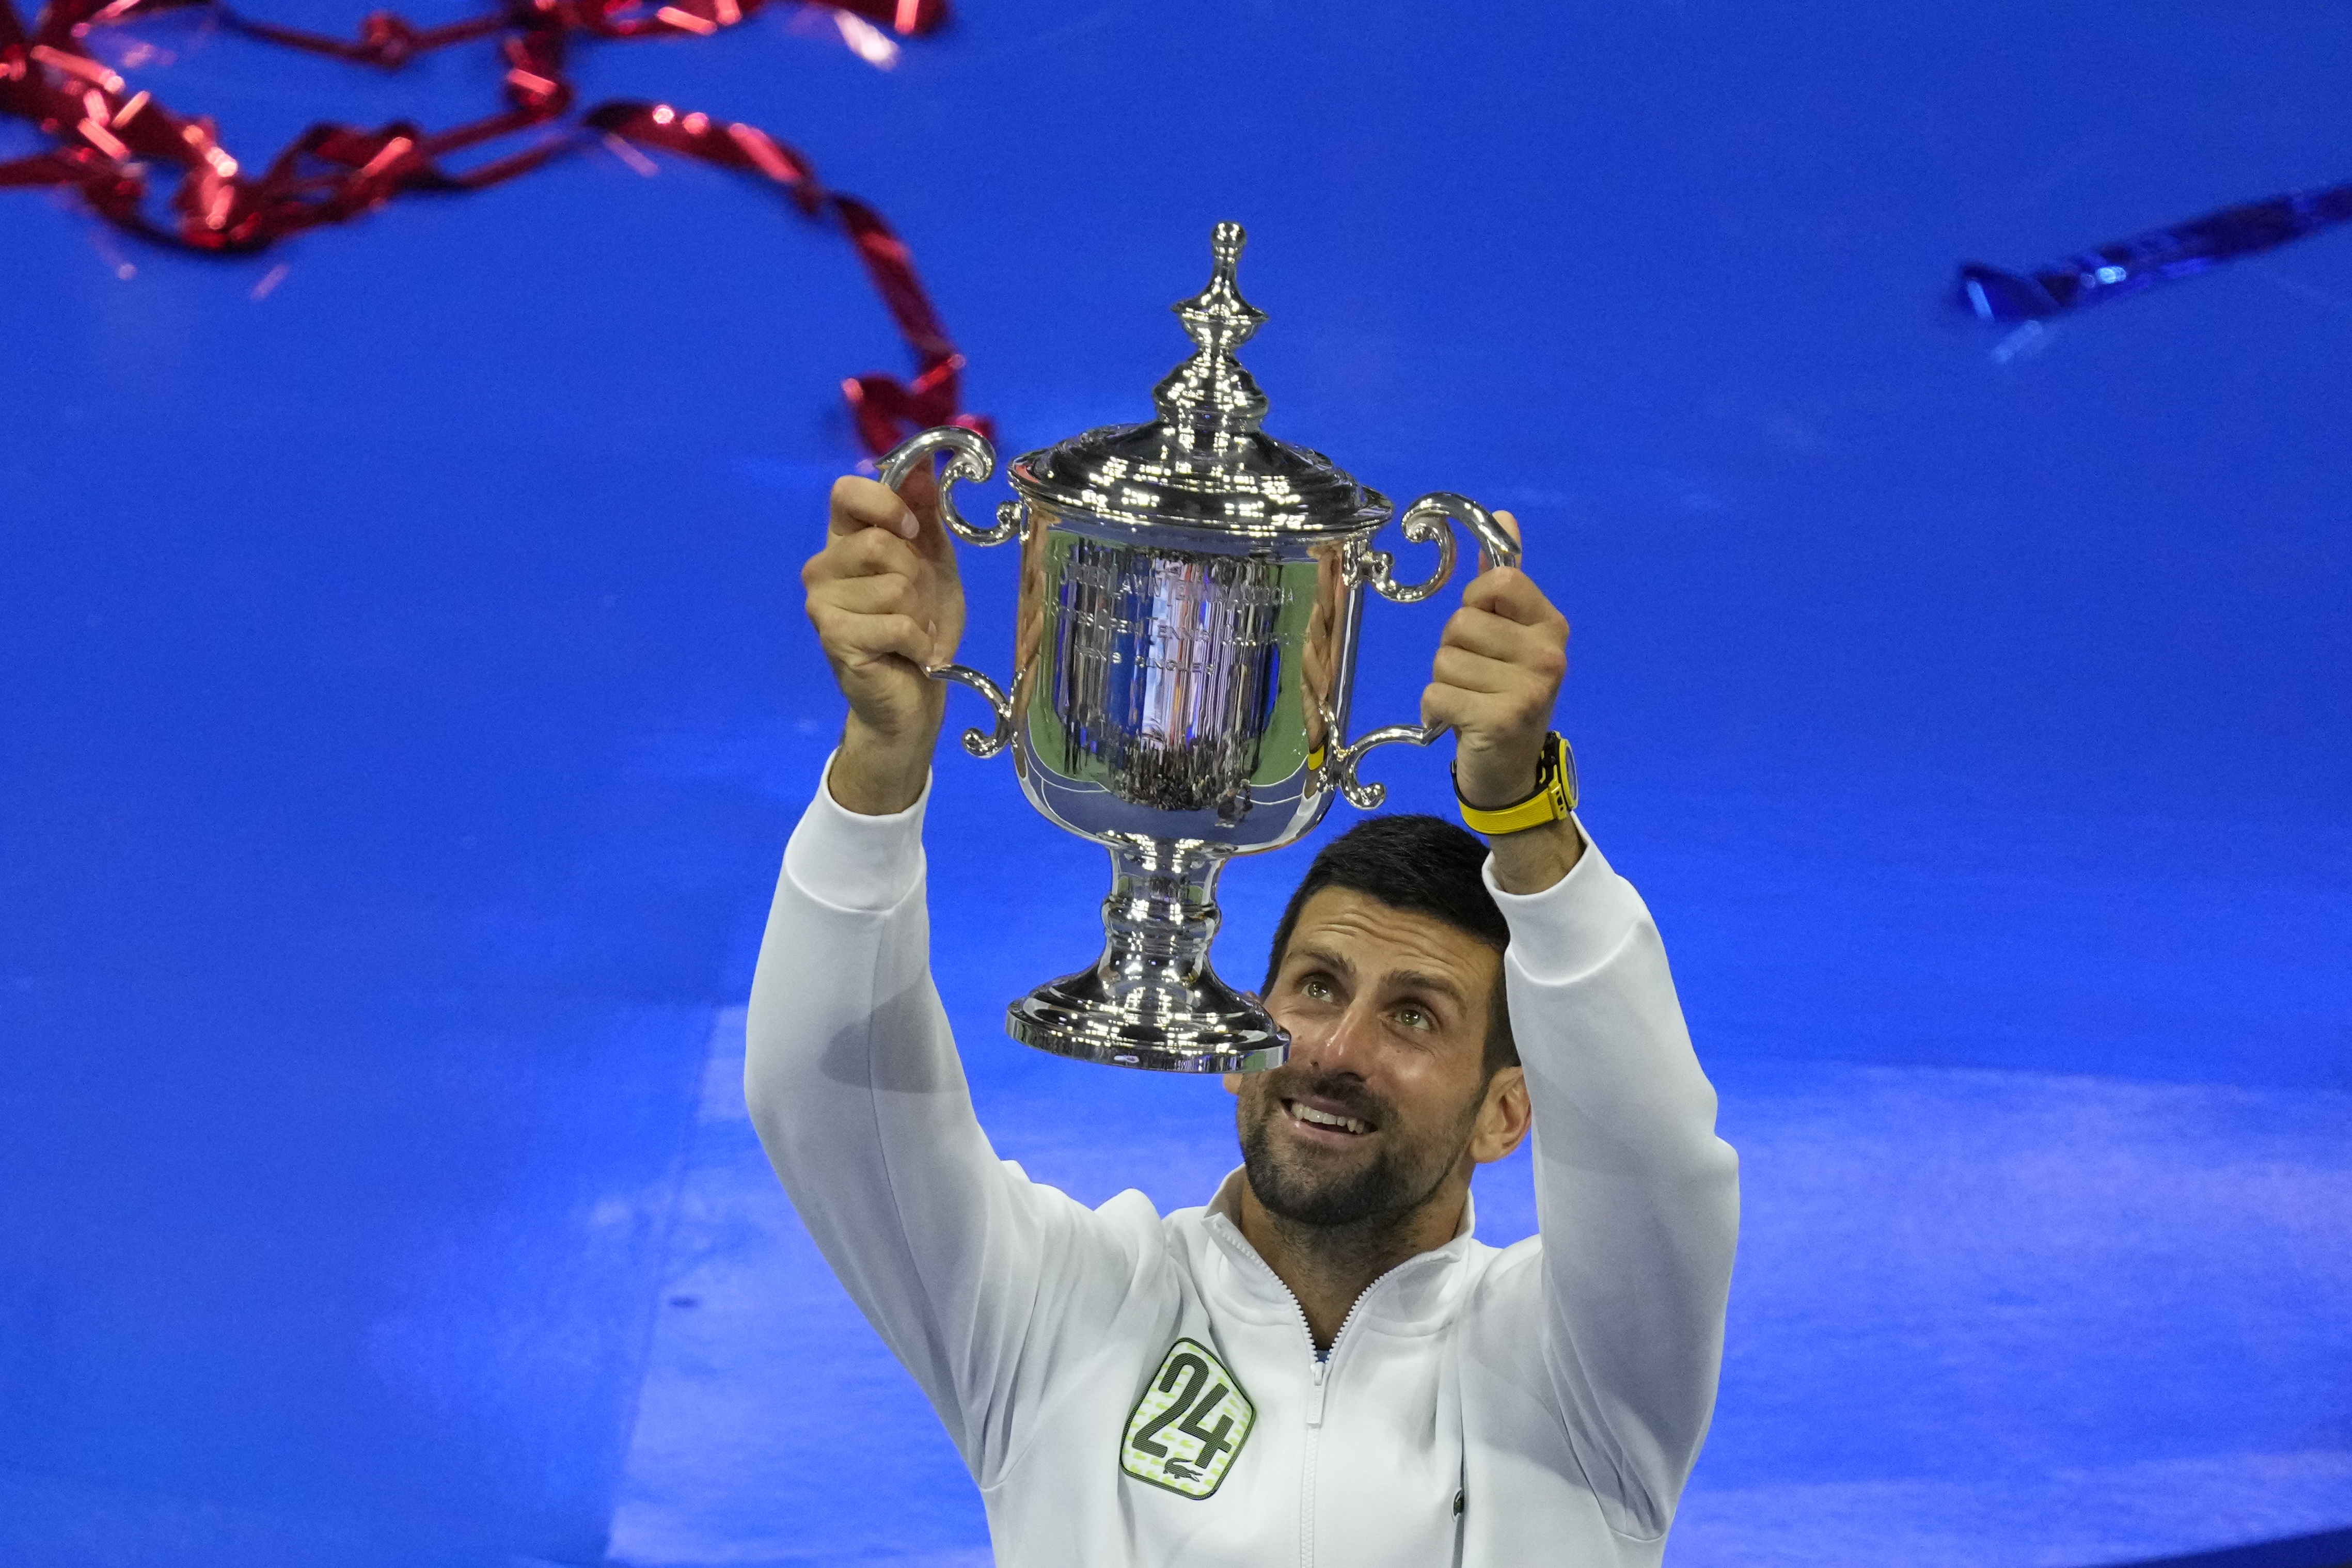 Ticket Sales for 2022 San Diego Open ATP 250 & WTA 500 Tournaments Begin at 8  a.m. (PDT) on Friday, August 12 - Tennis Connected